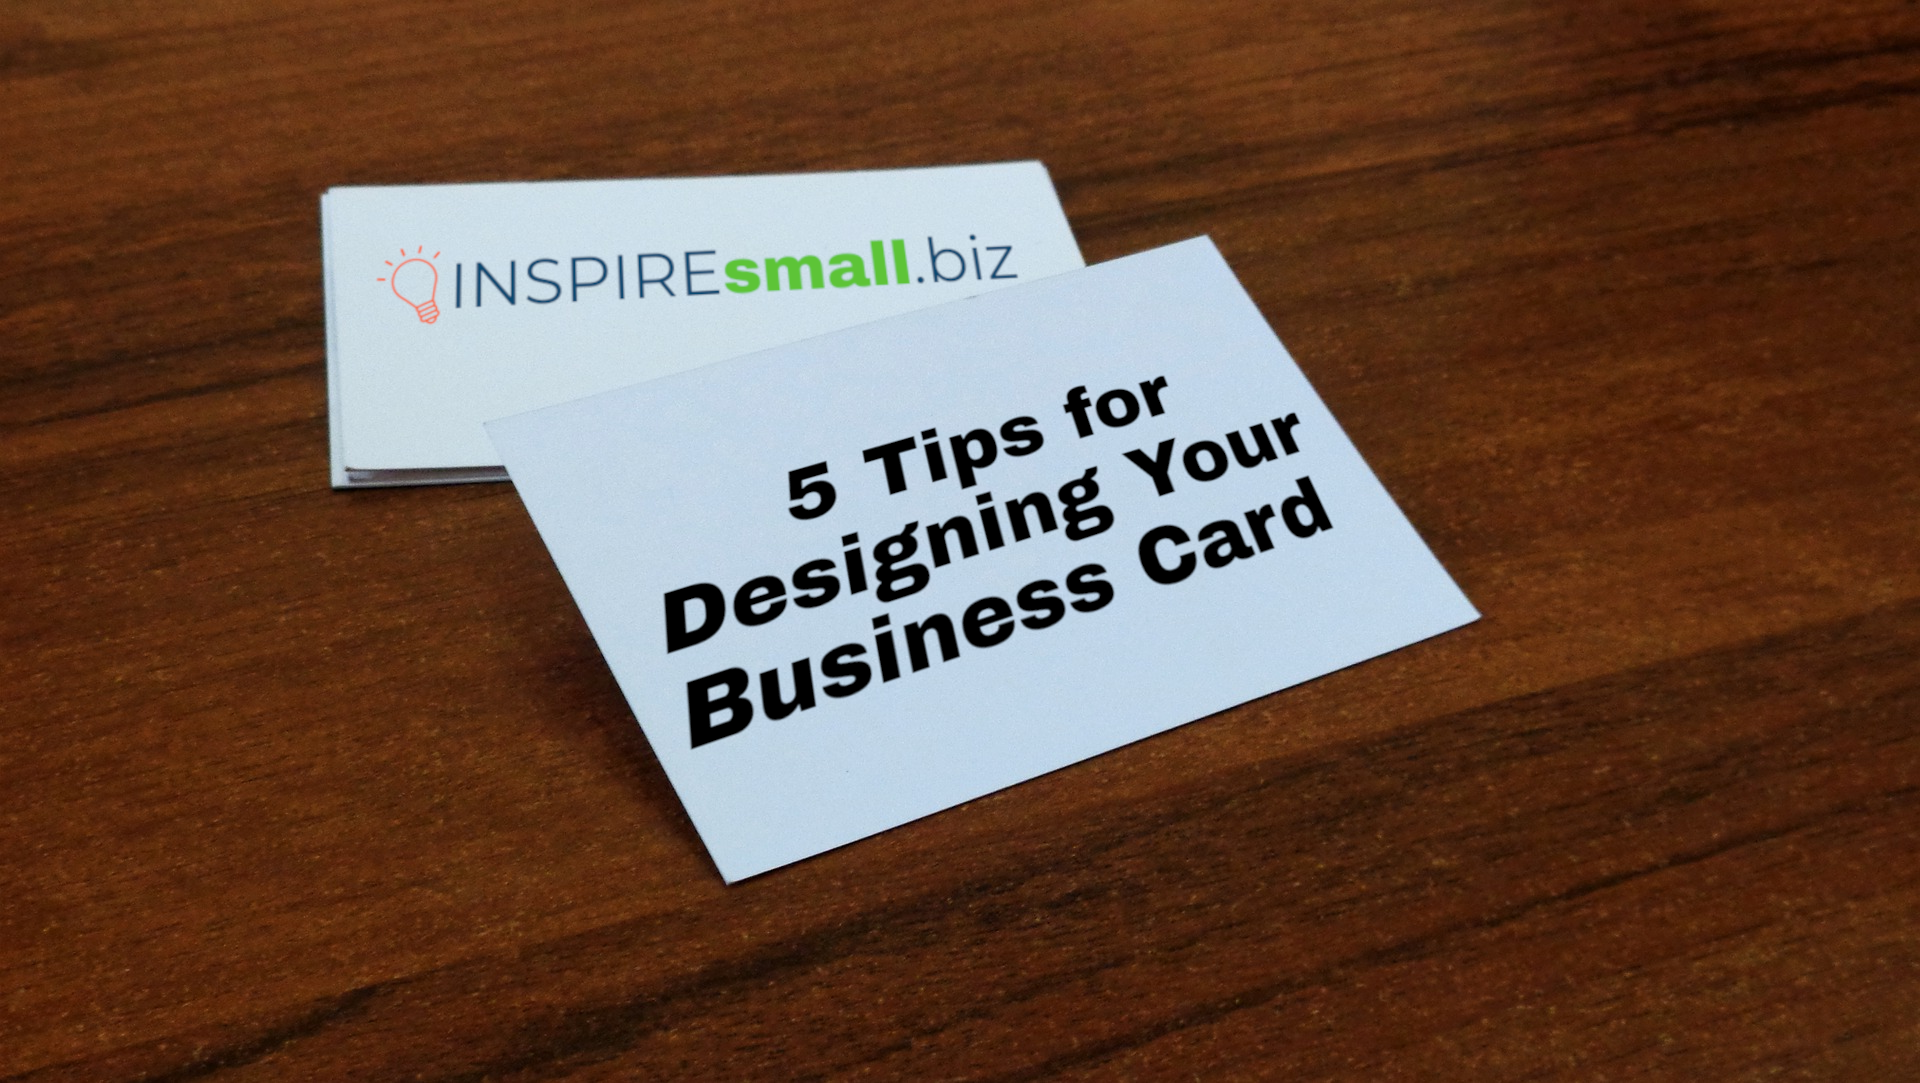 A stack of business cards with the INSPIREsmall.biz logo and the text '5 Tips for Designing Your Business Card'